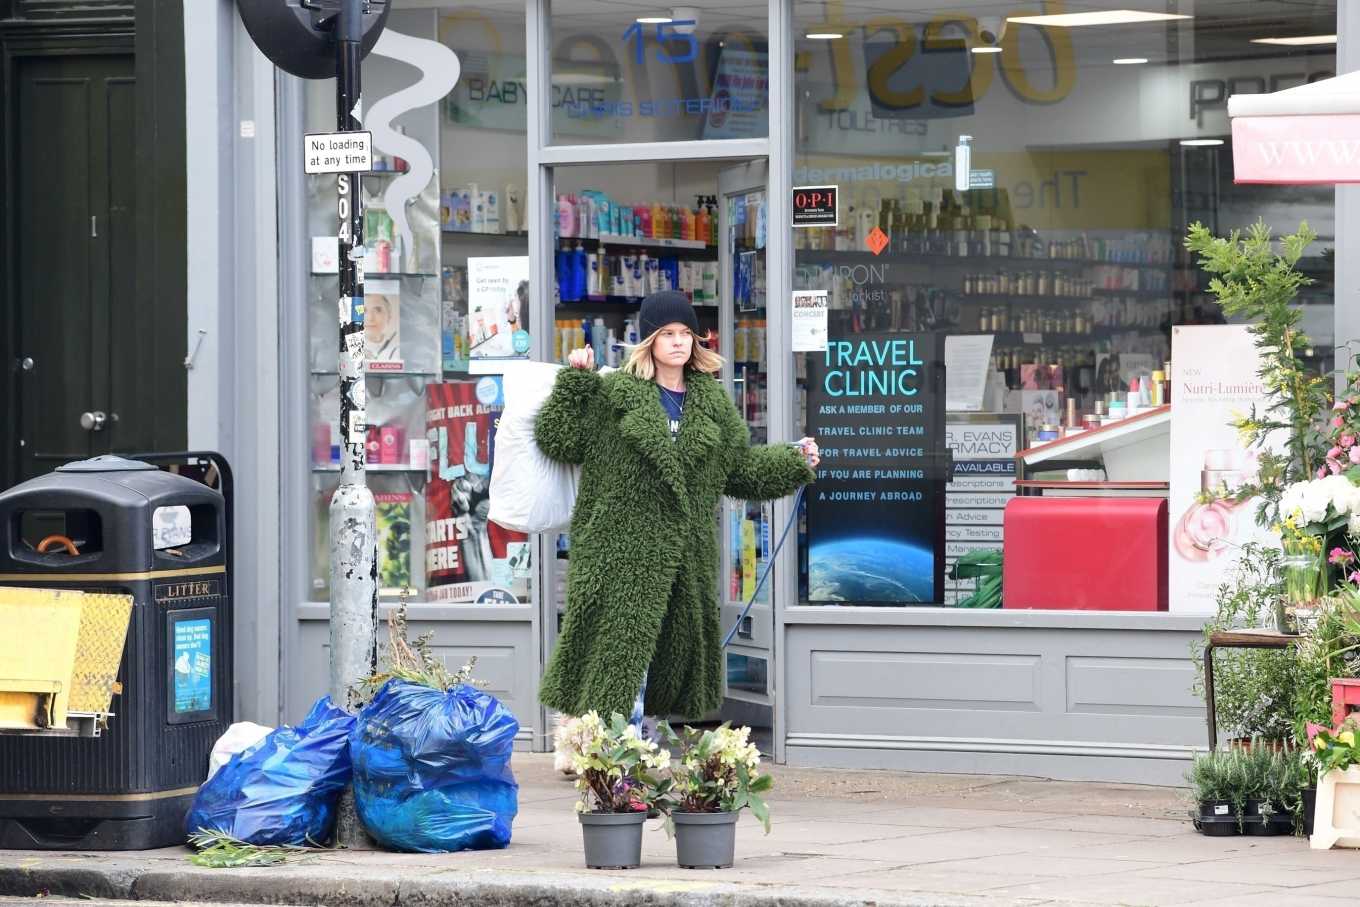 Alice Eve in Green Fur Coat â€“ Out in Notting Hill